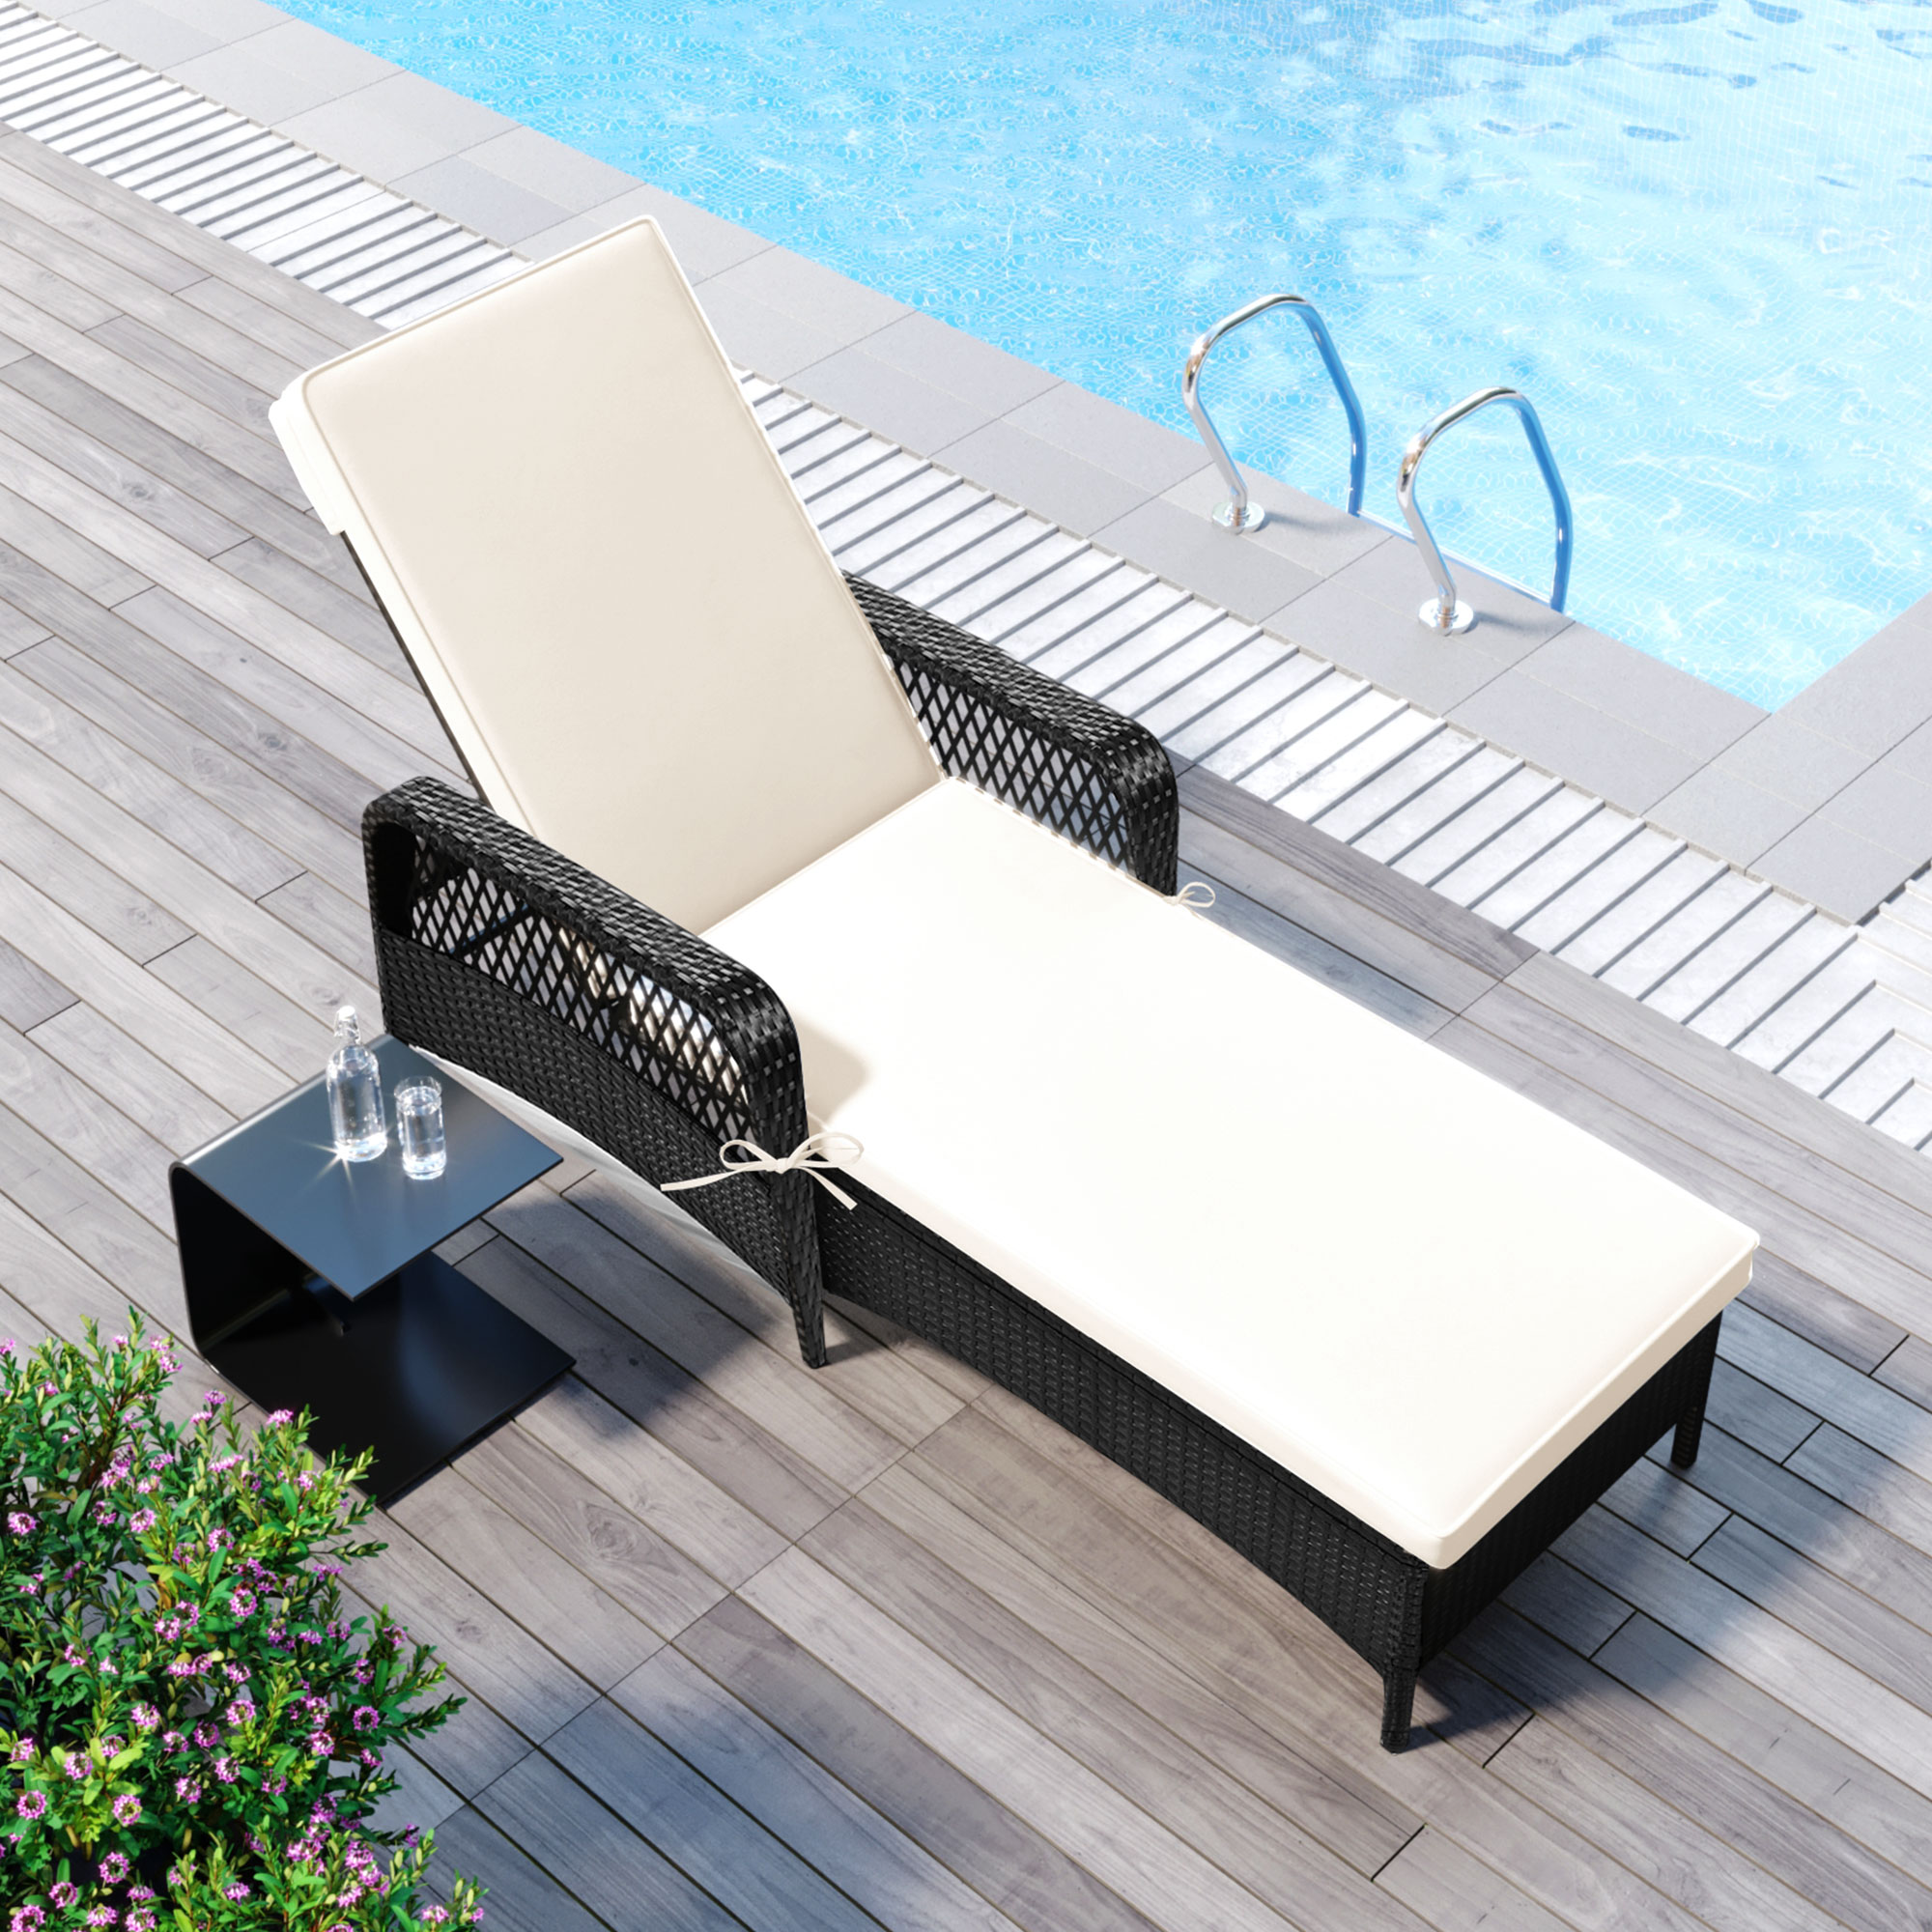 Sesslife Chaise Lounge Chair for Outside, Rattan Wicker Outdoor Lounge Chair, Adjustable Pool Lounge Chair with Thickened Cushion for Patio Poolside Deck - image 3 of 10